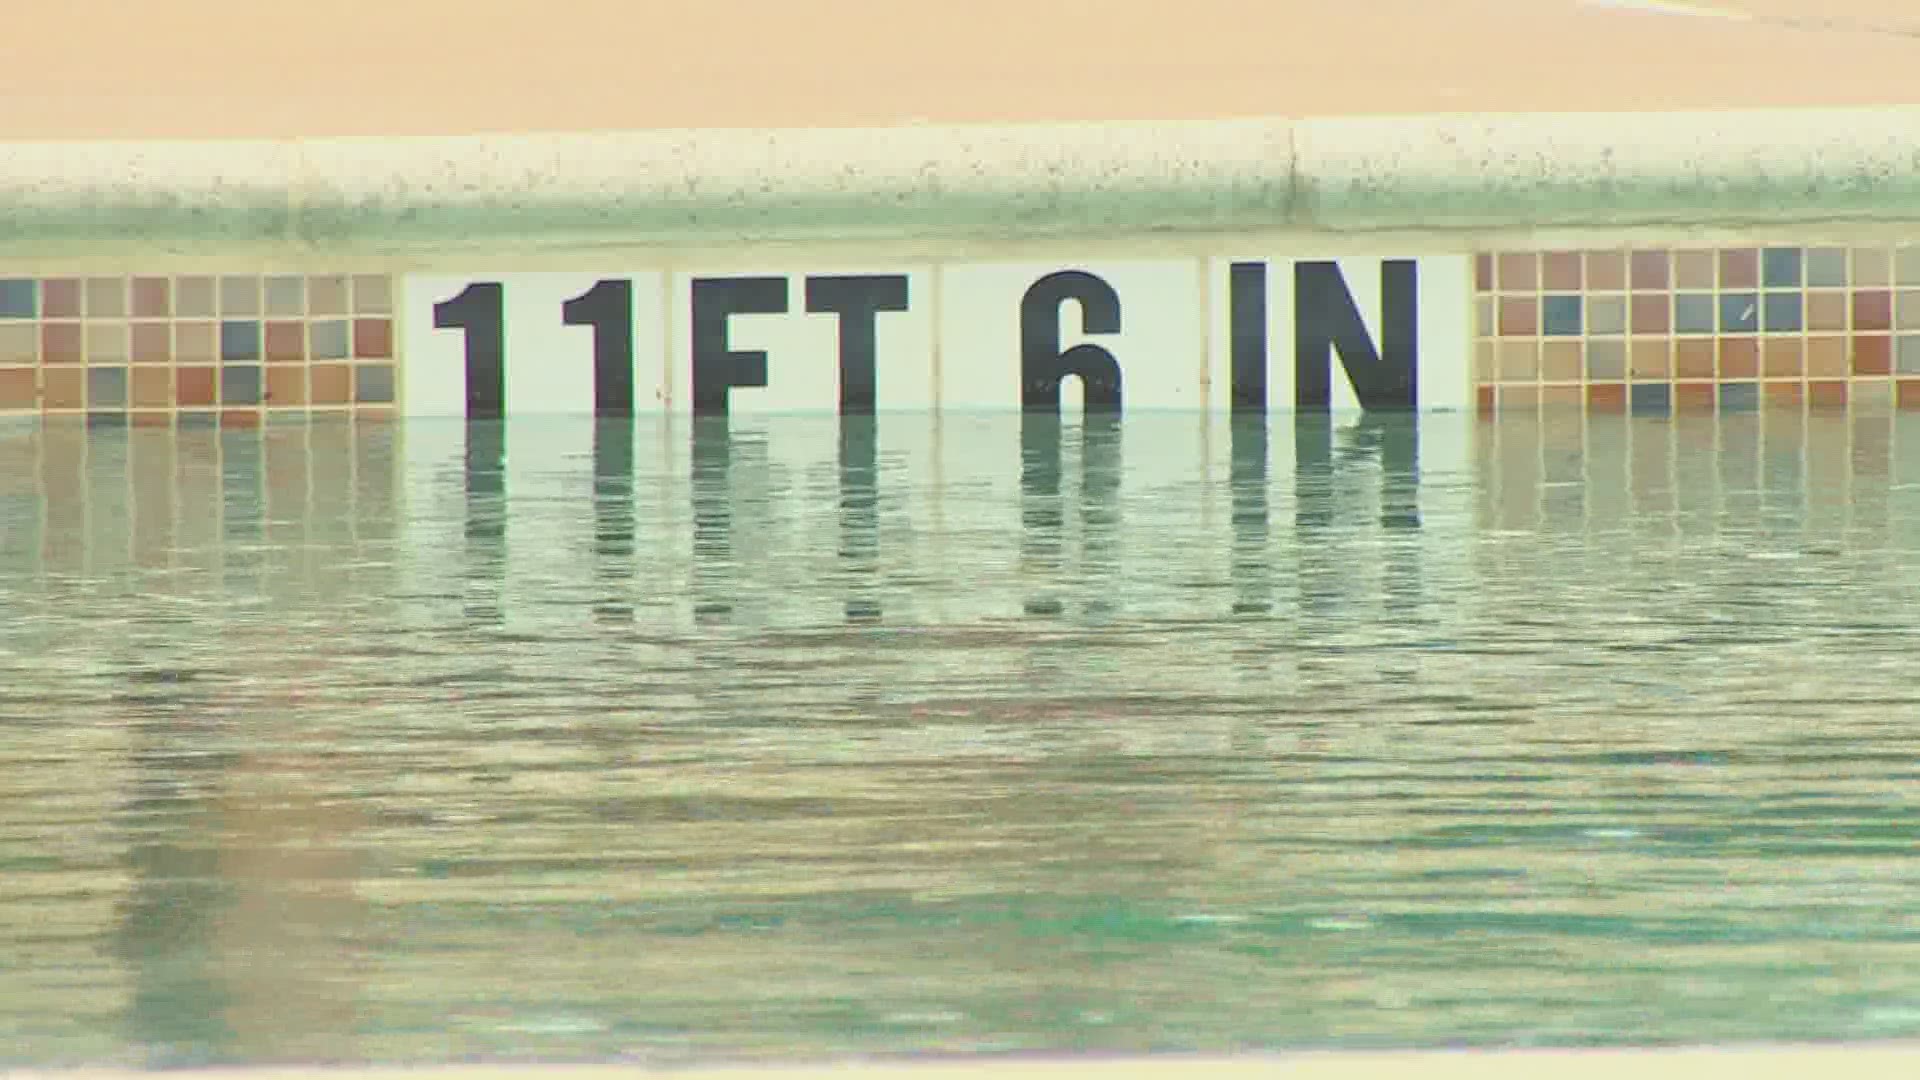 Changes to the Texas COVID-19 guidelines will allow some swimming pools to reopen Friday.